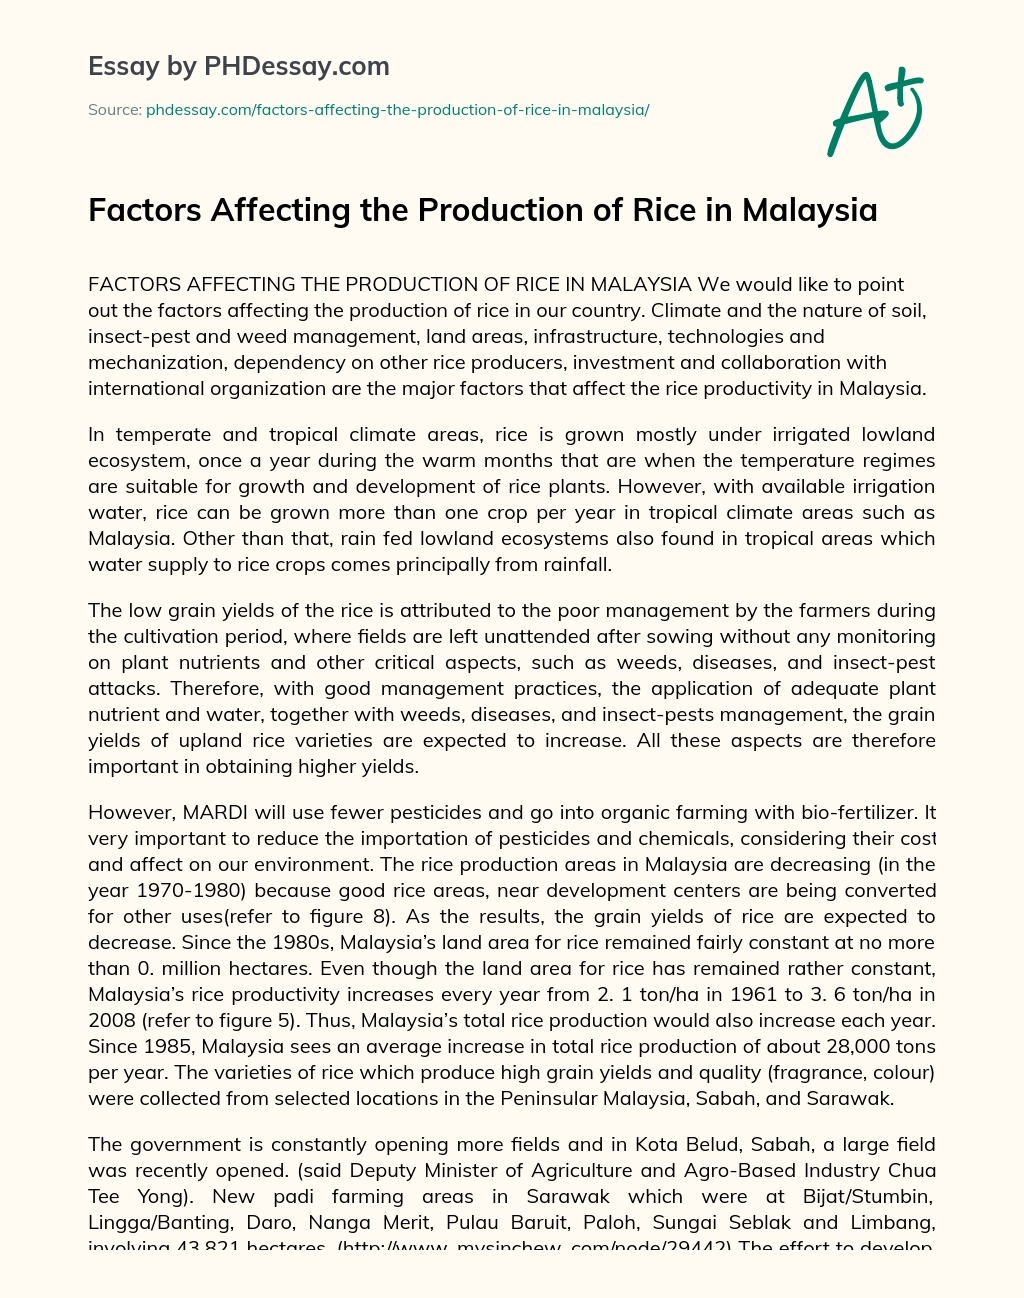 Factors Affecting the Production of Rice in Malaysia essay